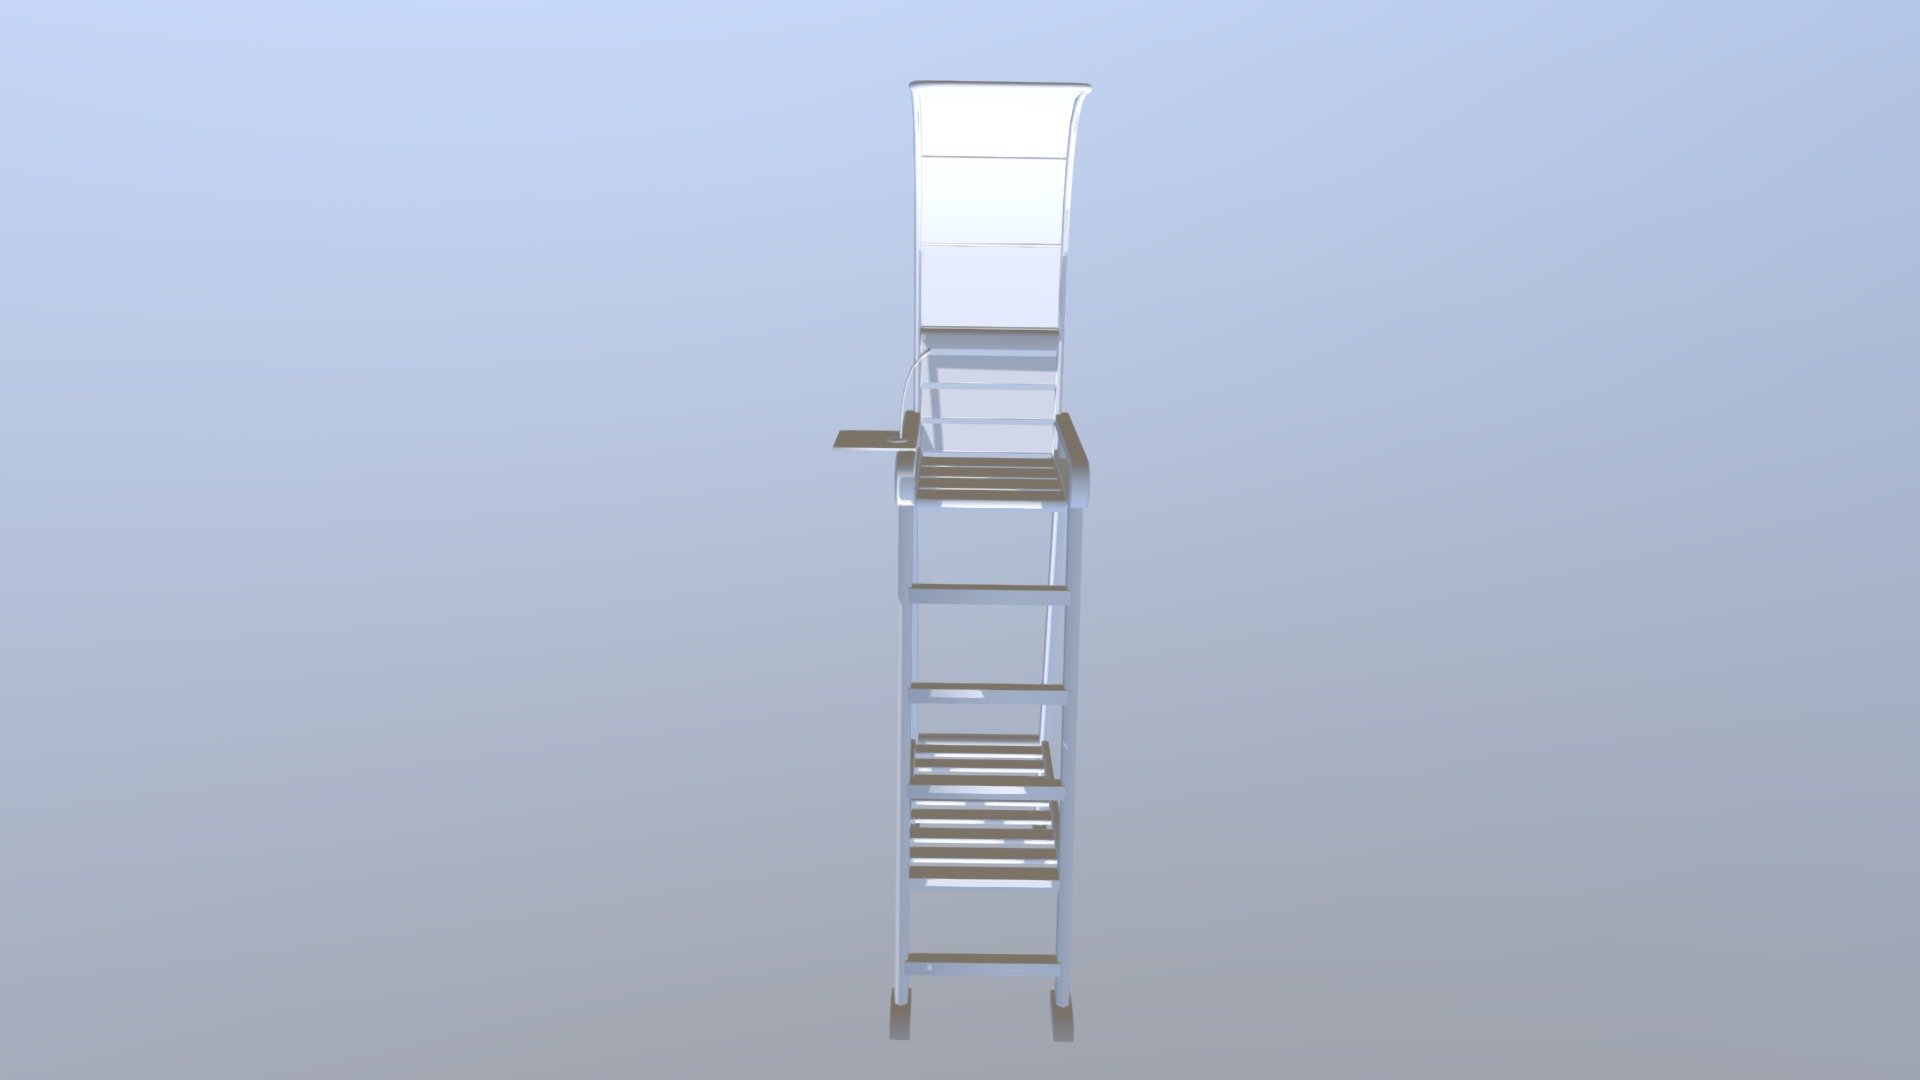 3D Model made by me for Super Tennis Blast - Umpire Chair - 3D model by bruadrianus 3d model